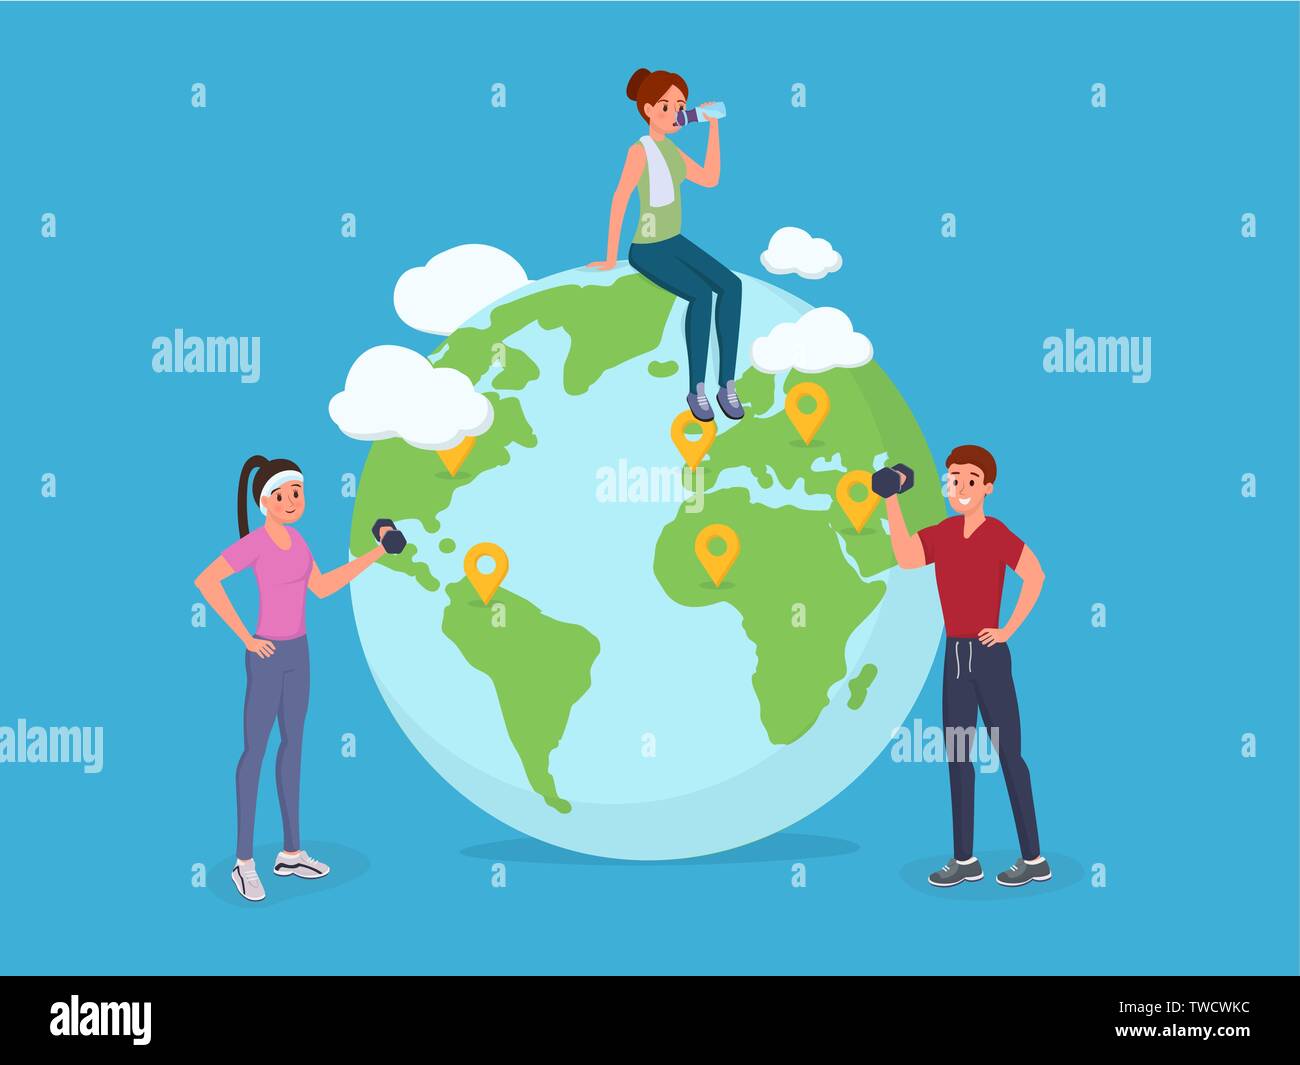 Cartoon fitness people sitting and standing near globe vector illustration. Men and women having workout around world. Healthy lifestyle concept. Location pins icons isolated on blue Stock Vector